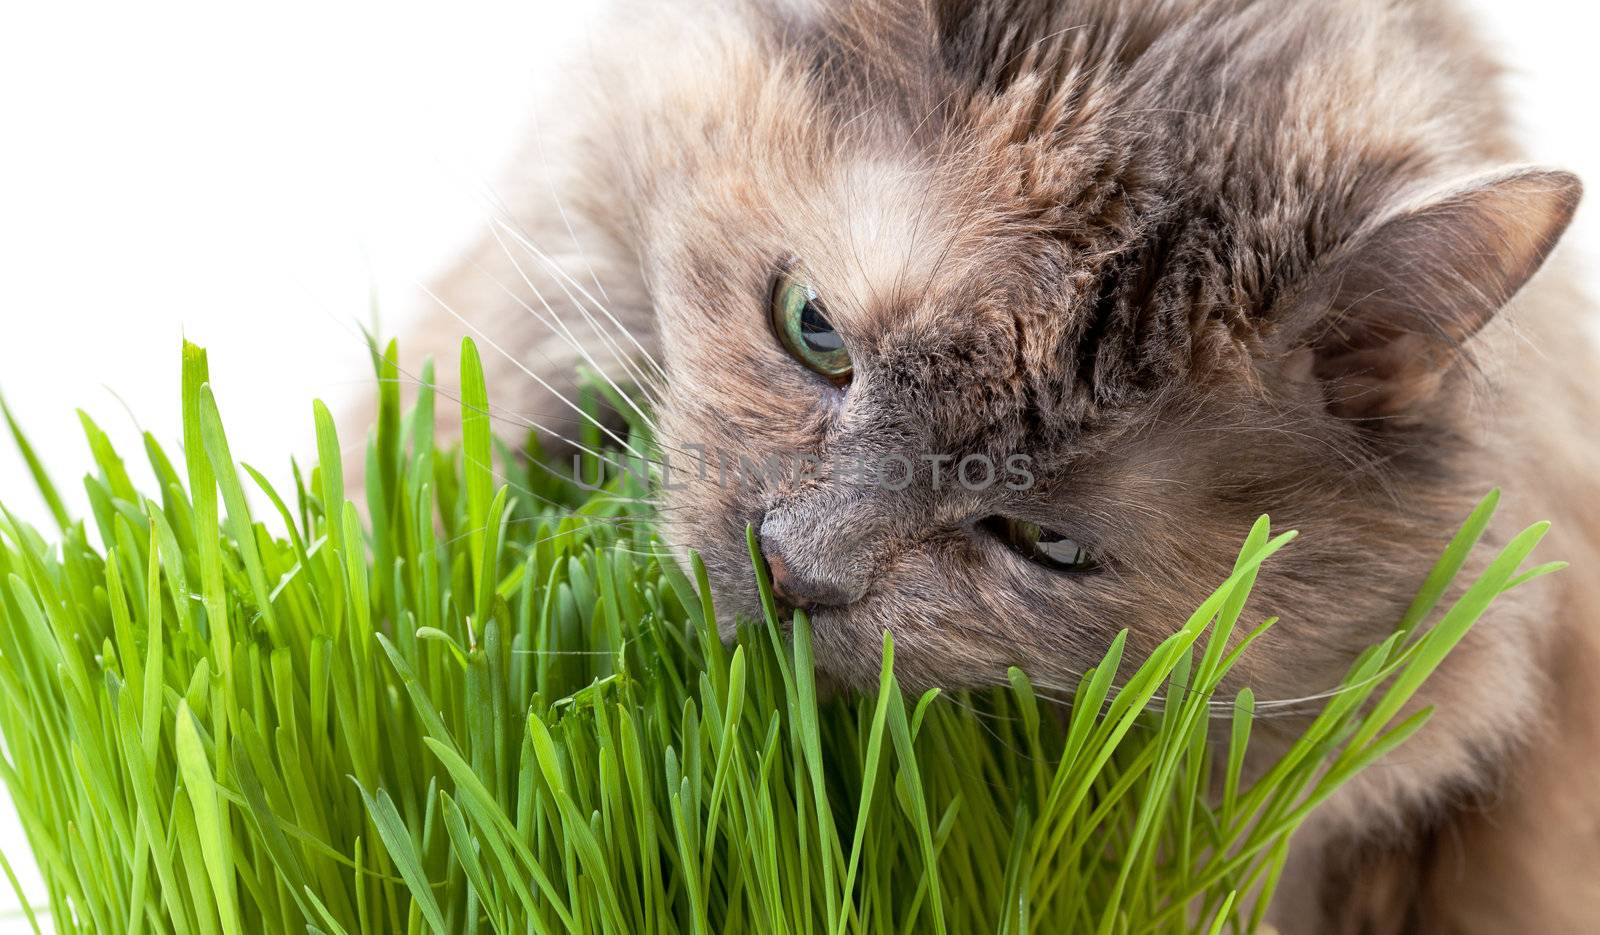 A pet cat eating fresh grass by Discovod